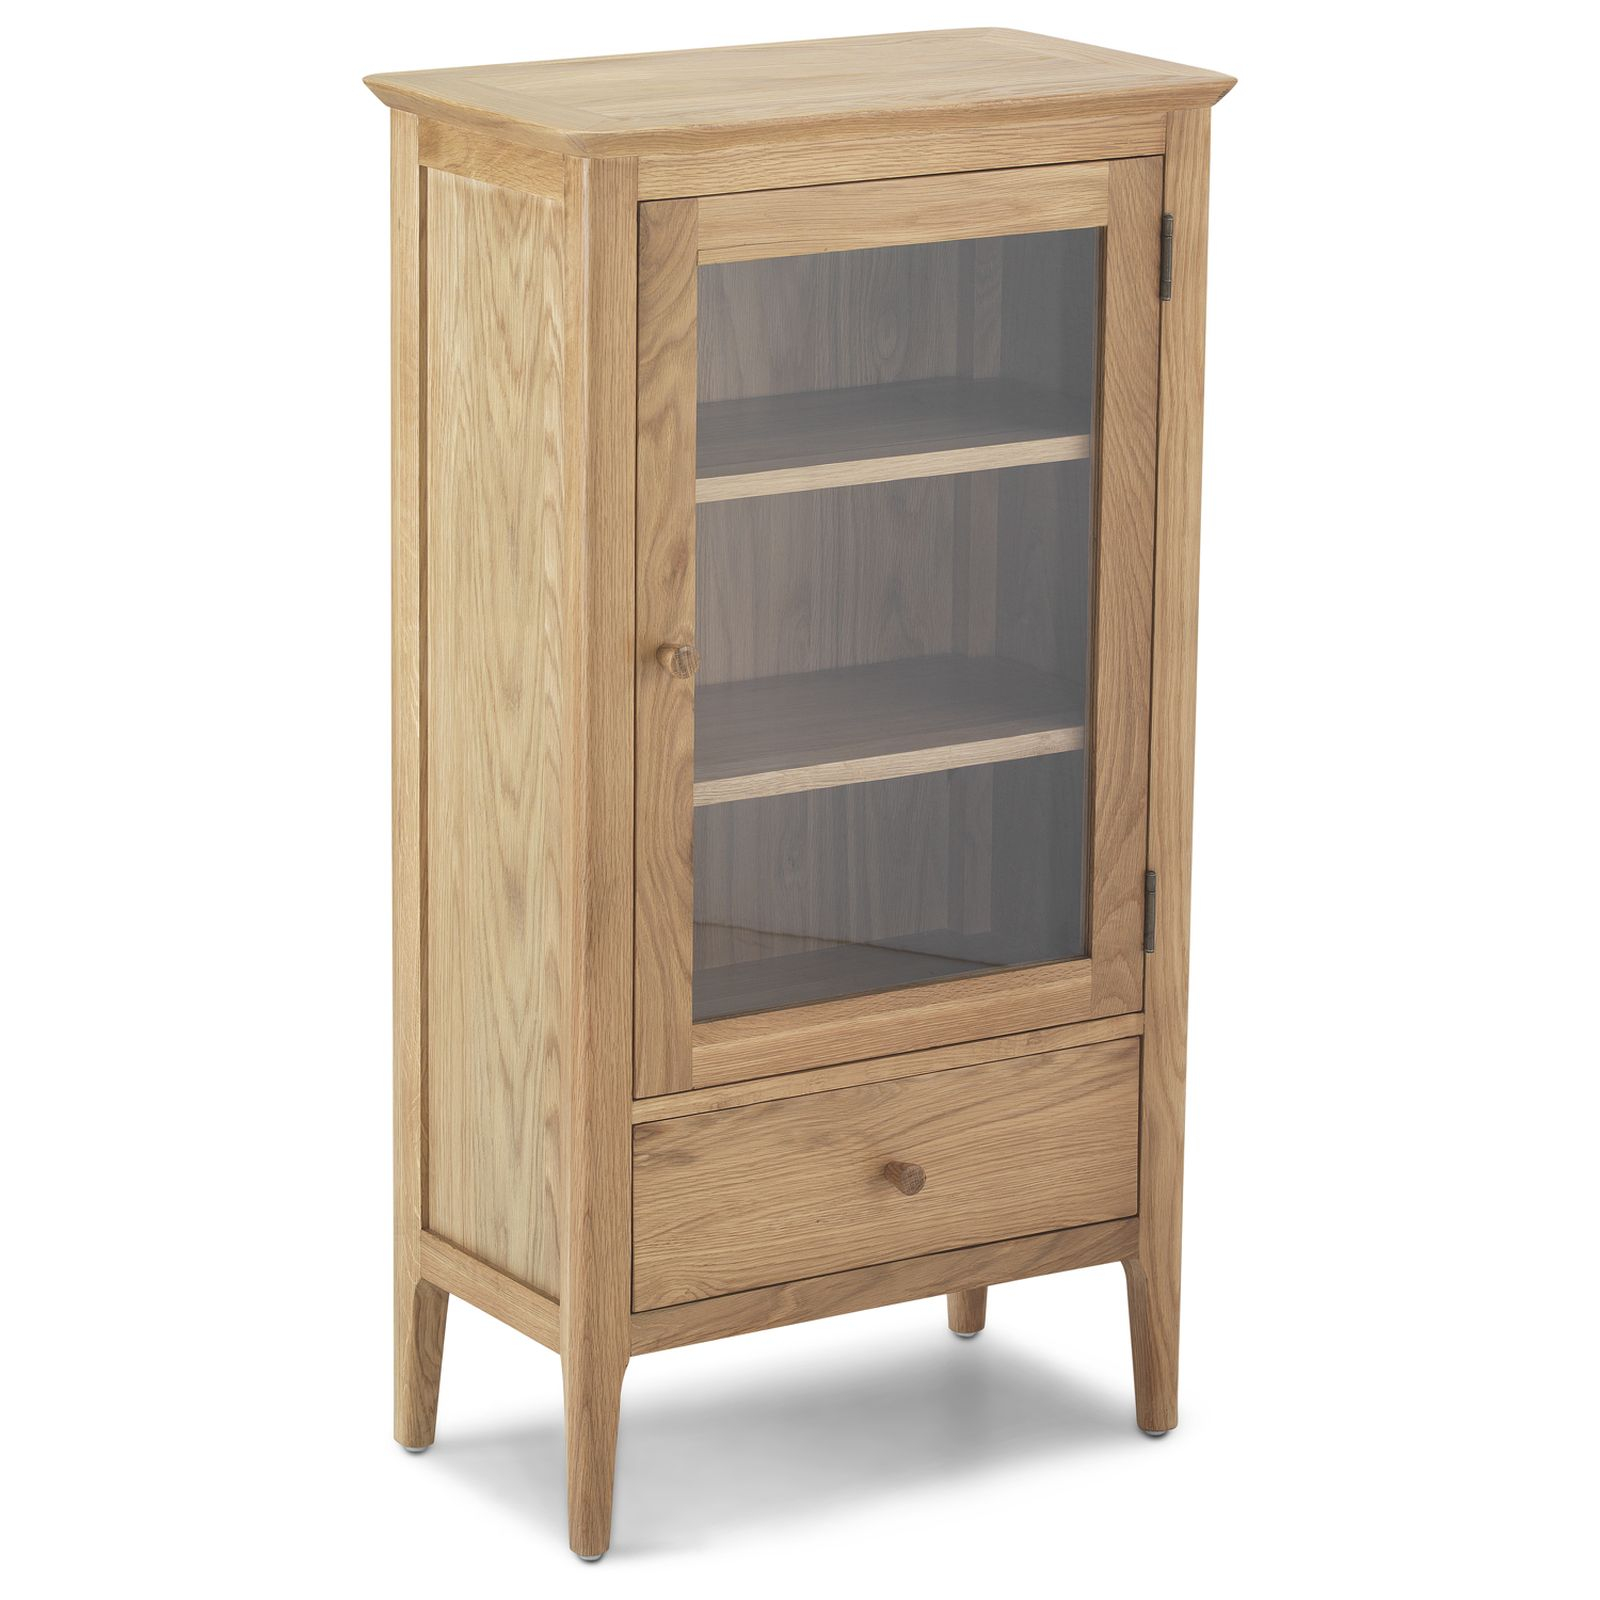 Details About Telford Solid Oak Furniture Small Glazed Bookcase With Drawer in dimensions 1600 X 1600